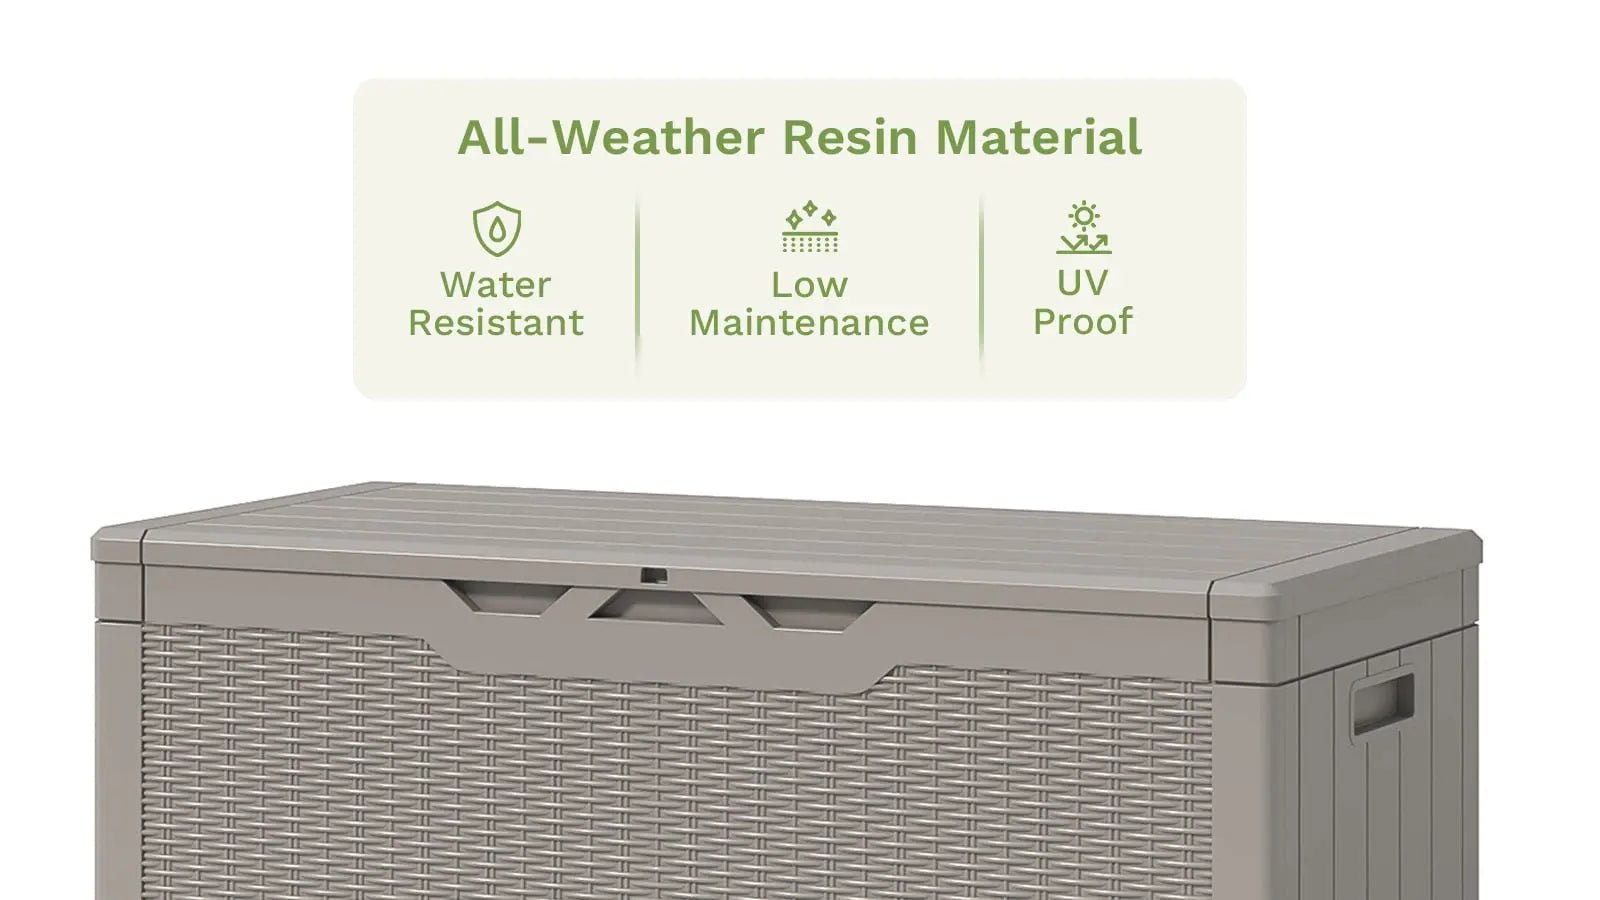 The 100 gallon ourdoor storage deck box features in all-weather resistant